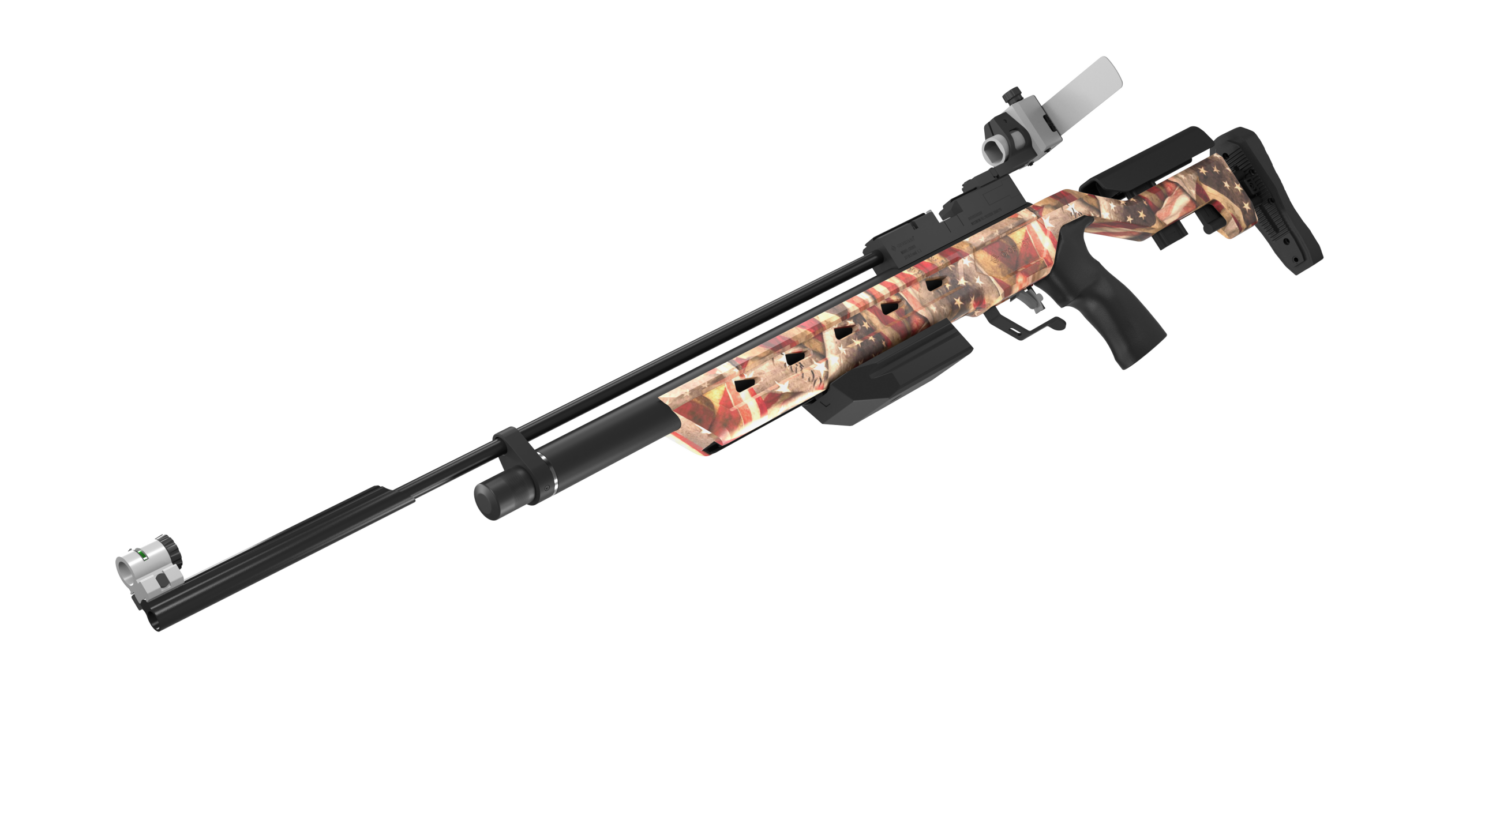 New Special Flag Edition Challenger Air Rifle from Crosman